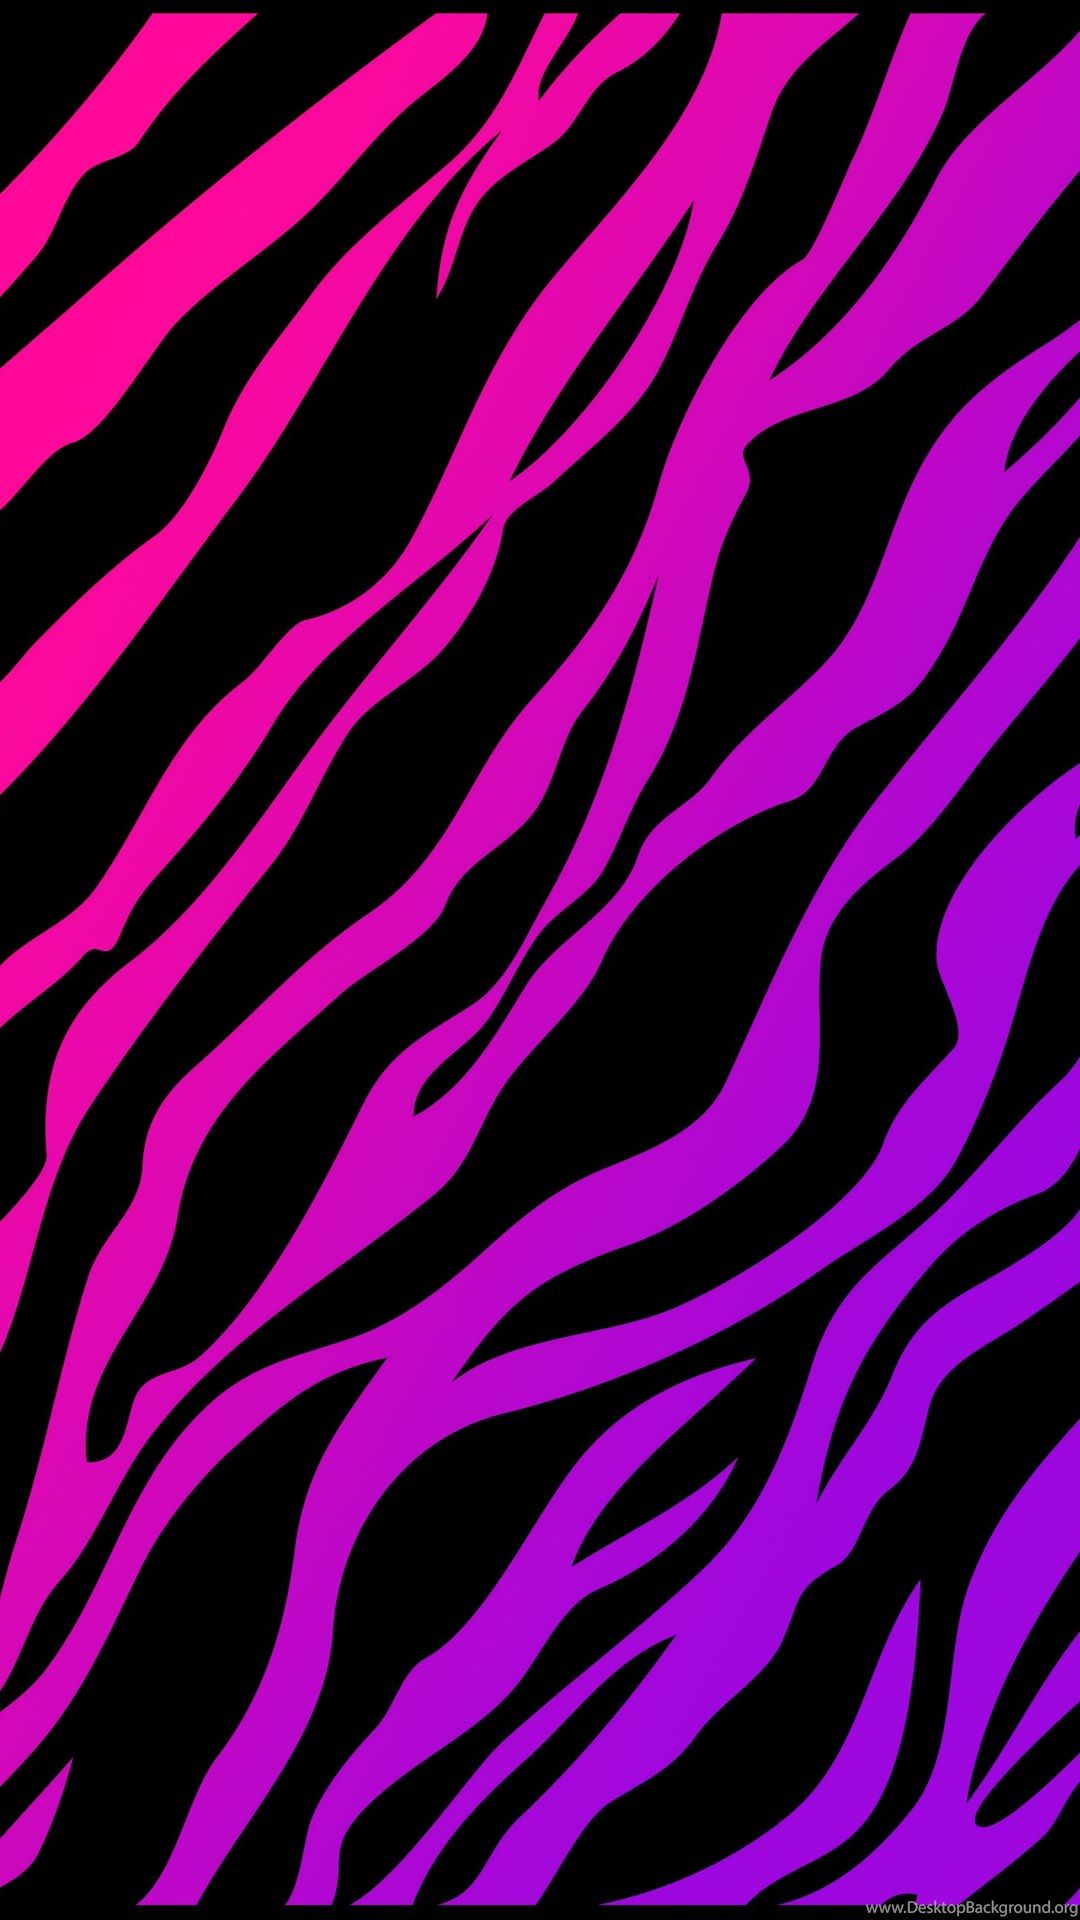 Download Zebra Print Pink Leopard Wallpapers Mobile, Android 